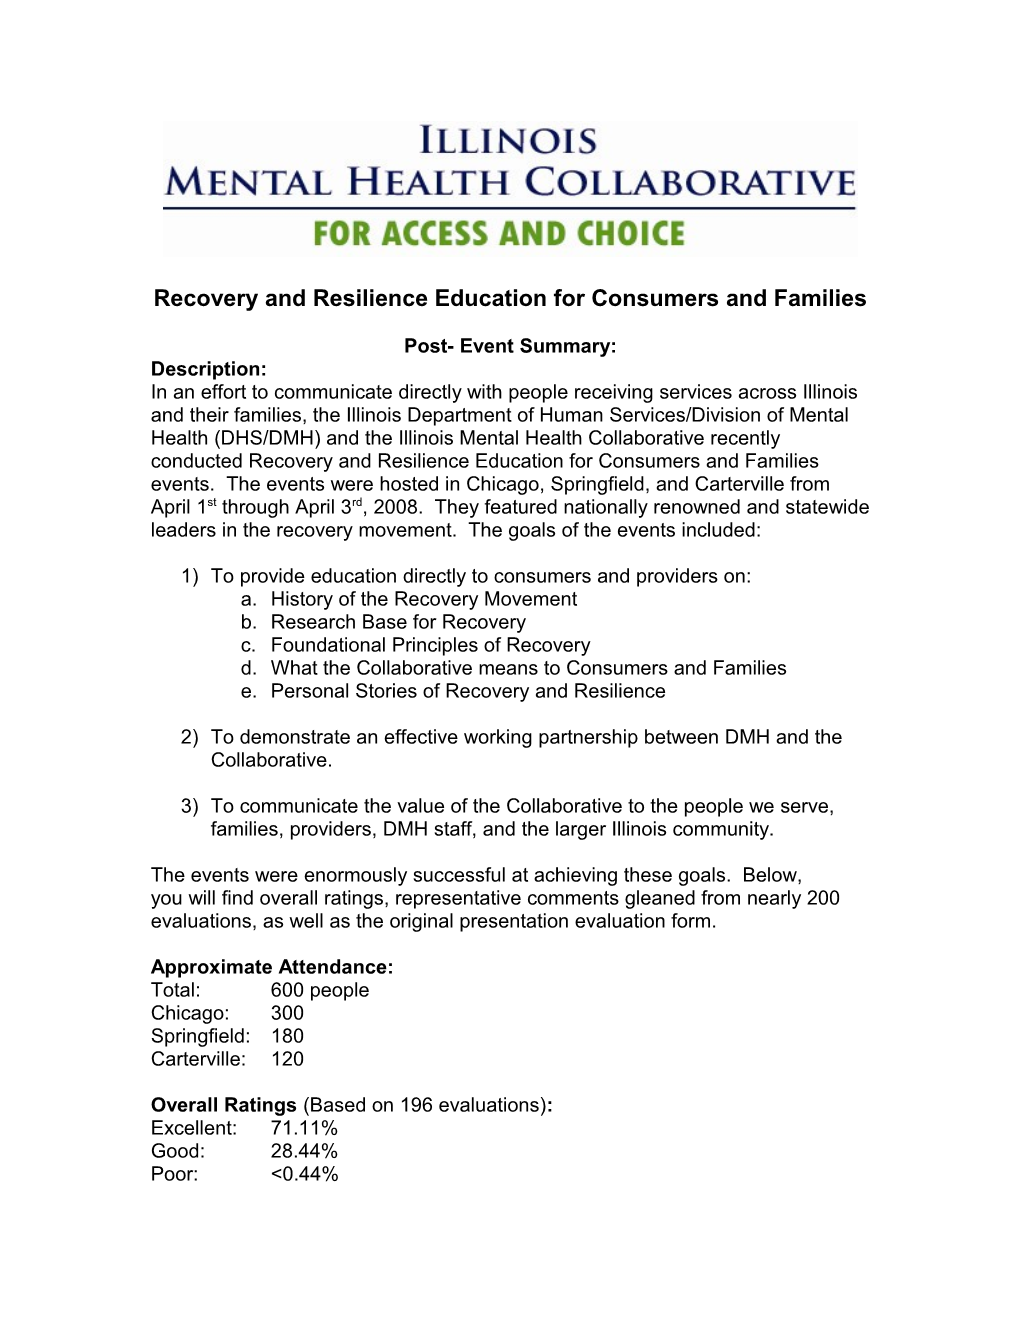 Illinois Mental Health Collaborative for Access and Choice